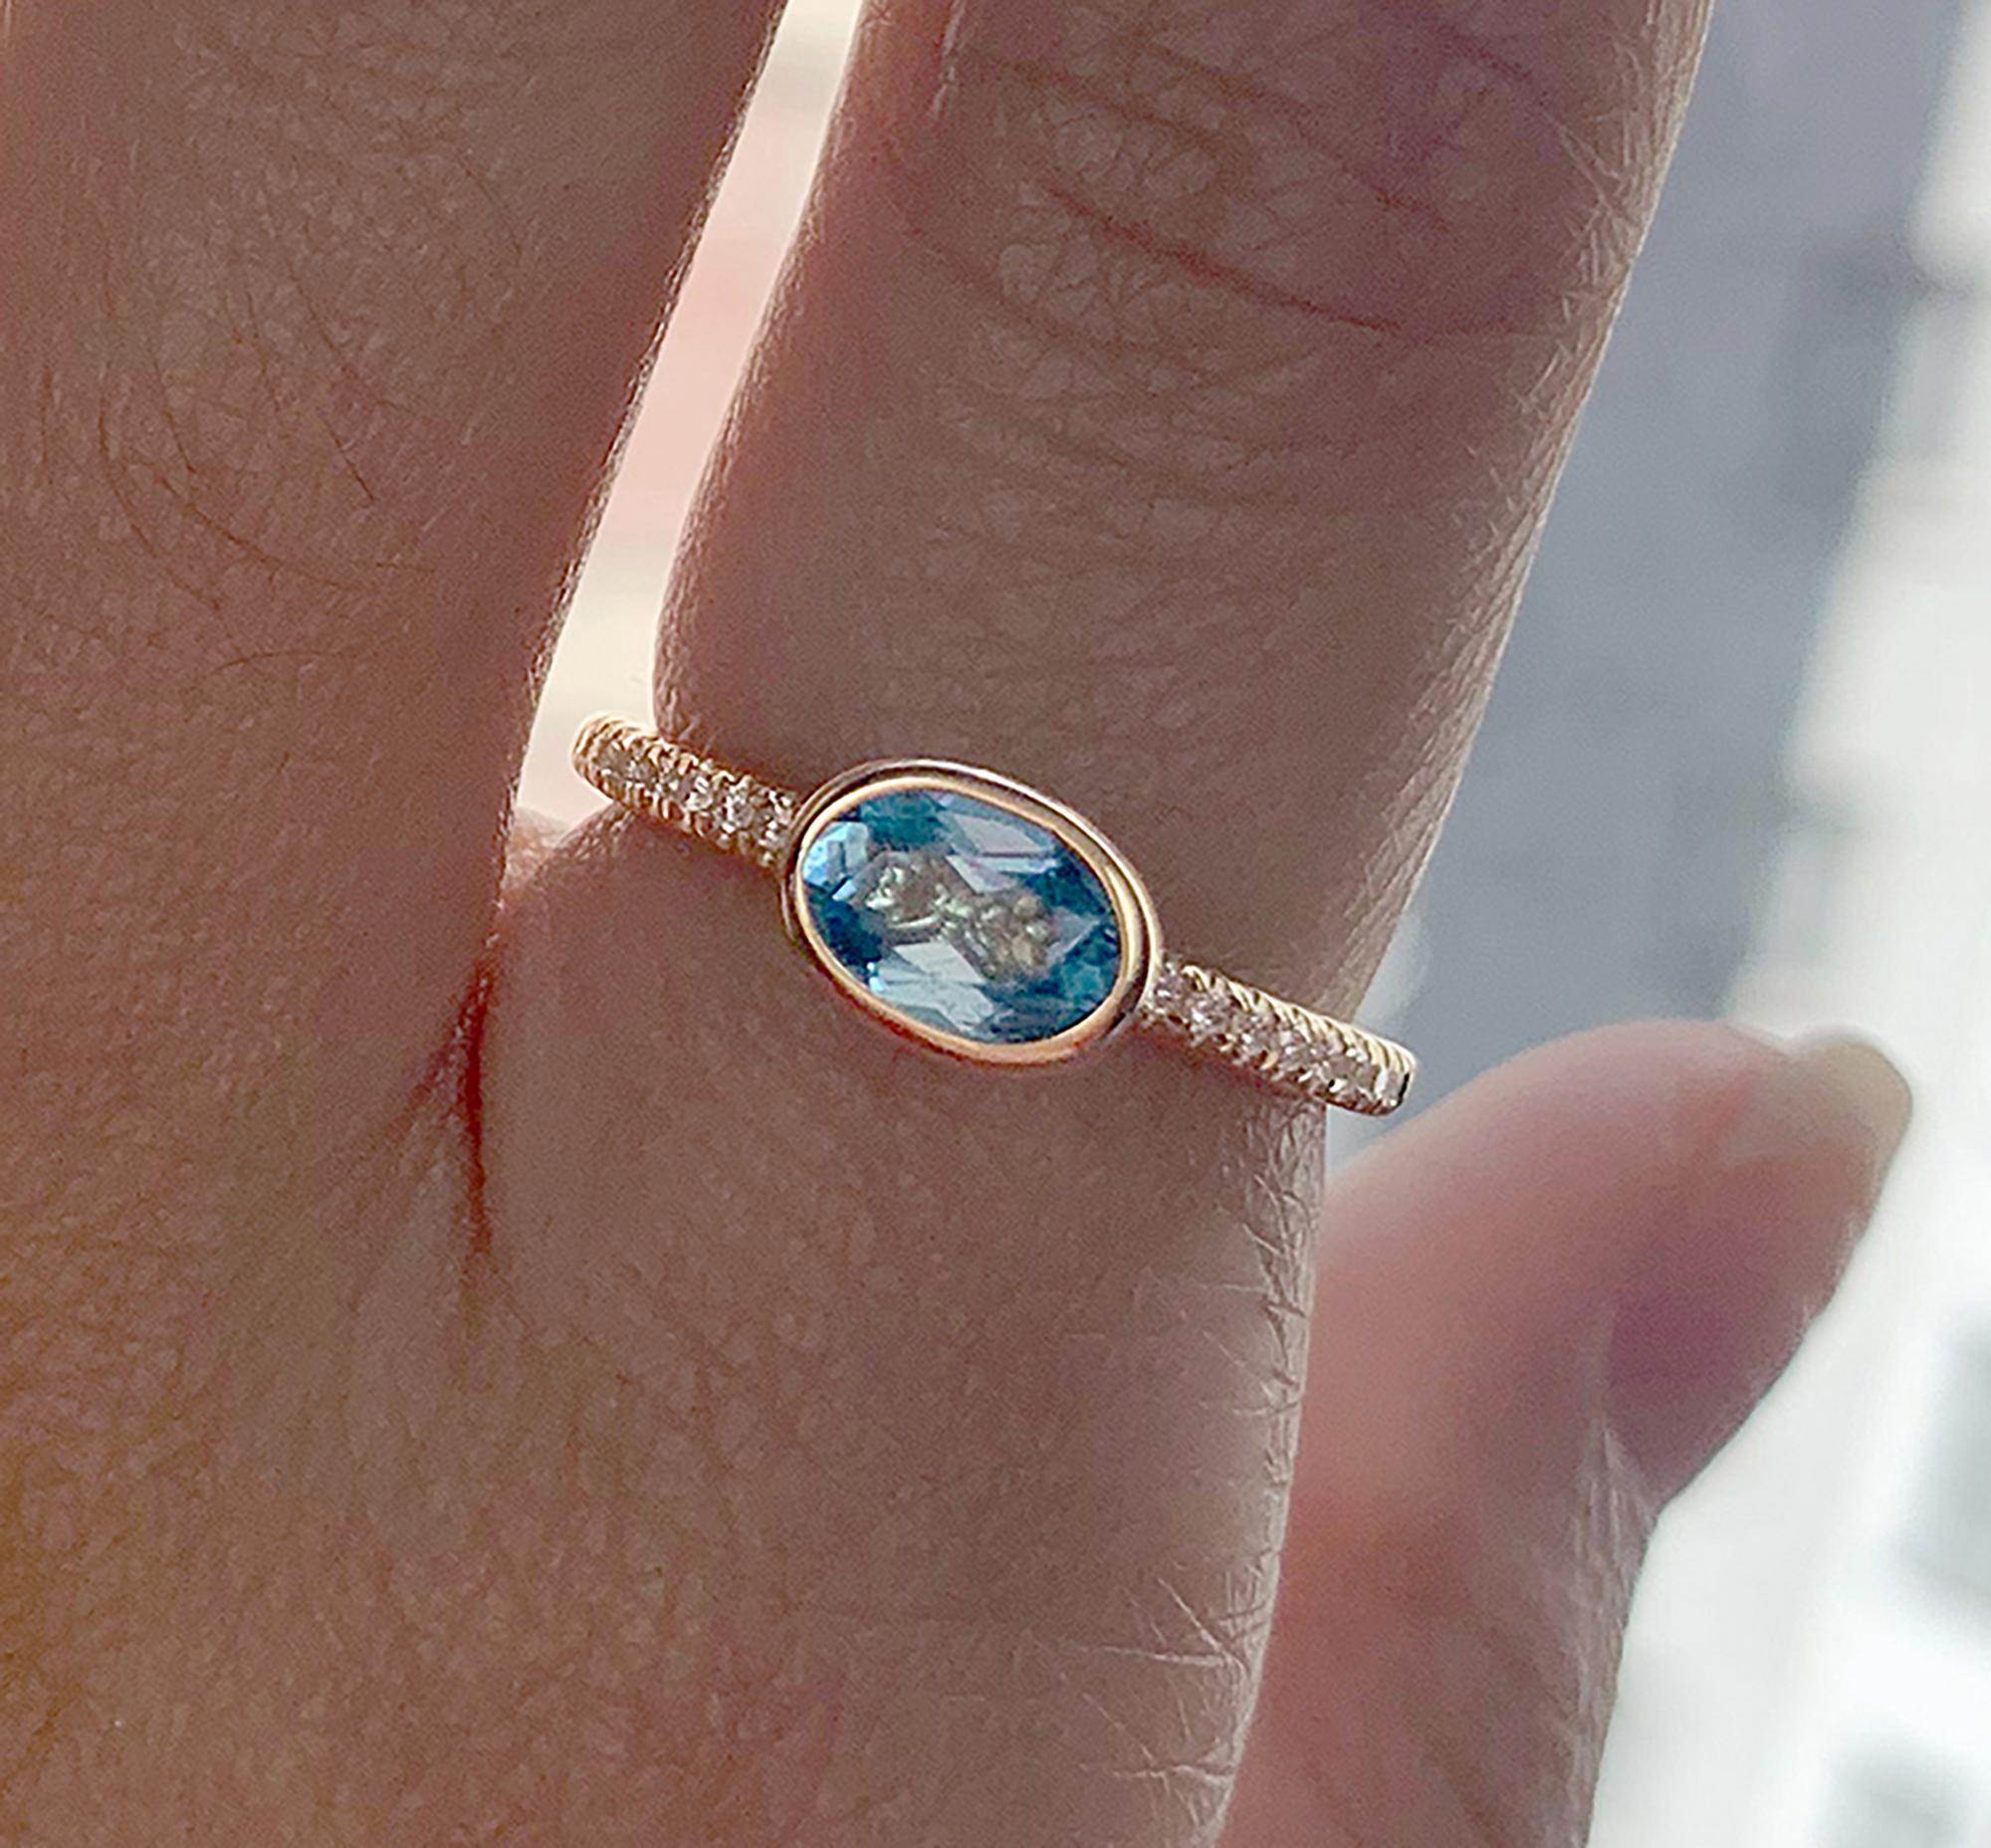 The Blue Topaz Faceted Oval Stackable Ring with Diamonds in 18K Yellow Gold is a stunning piece of jewelry from the 'Gossip' Collection. The ring features a beautiful blue topaz stone in an oval shape, with a faceted cut that catches the light and